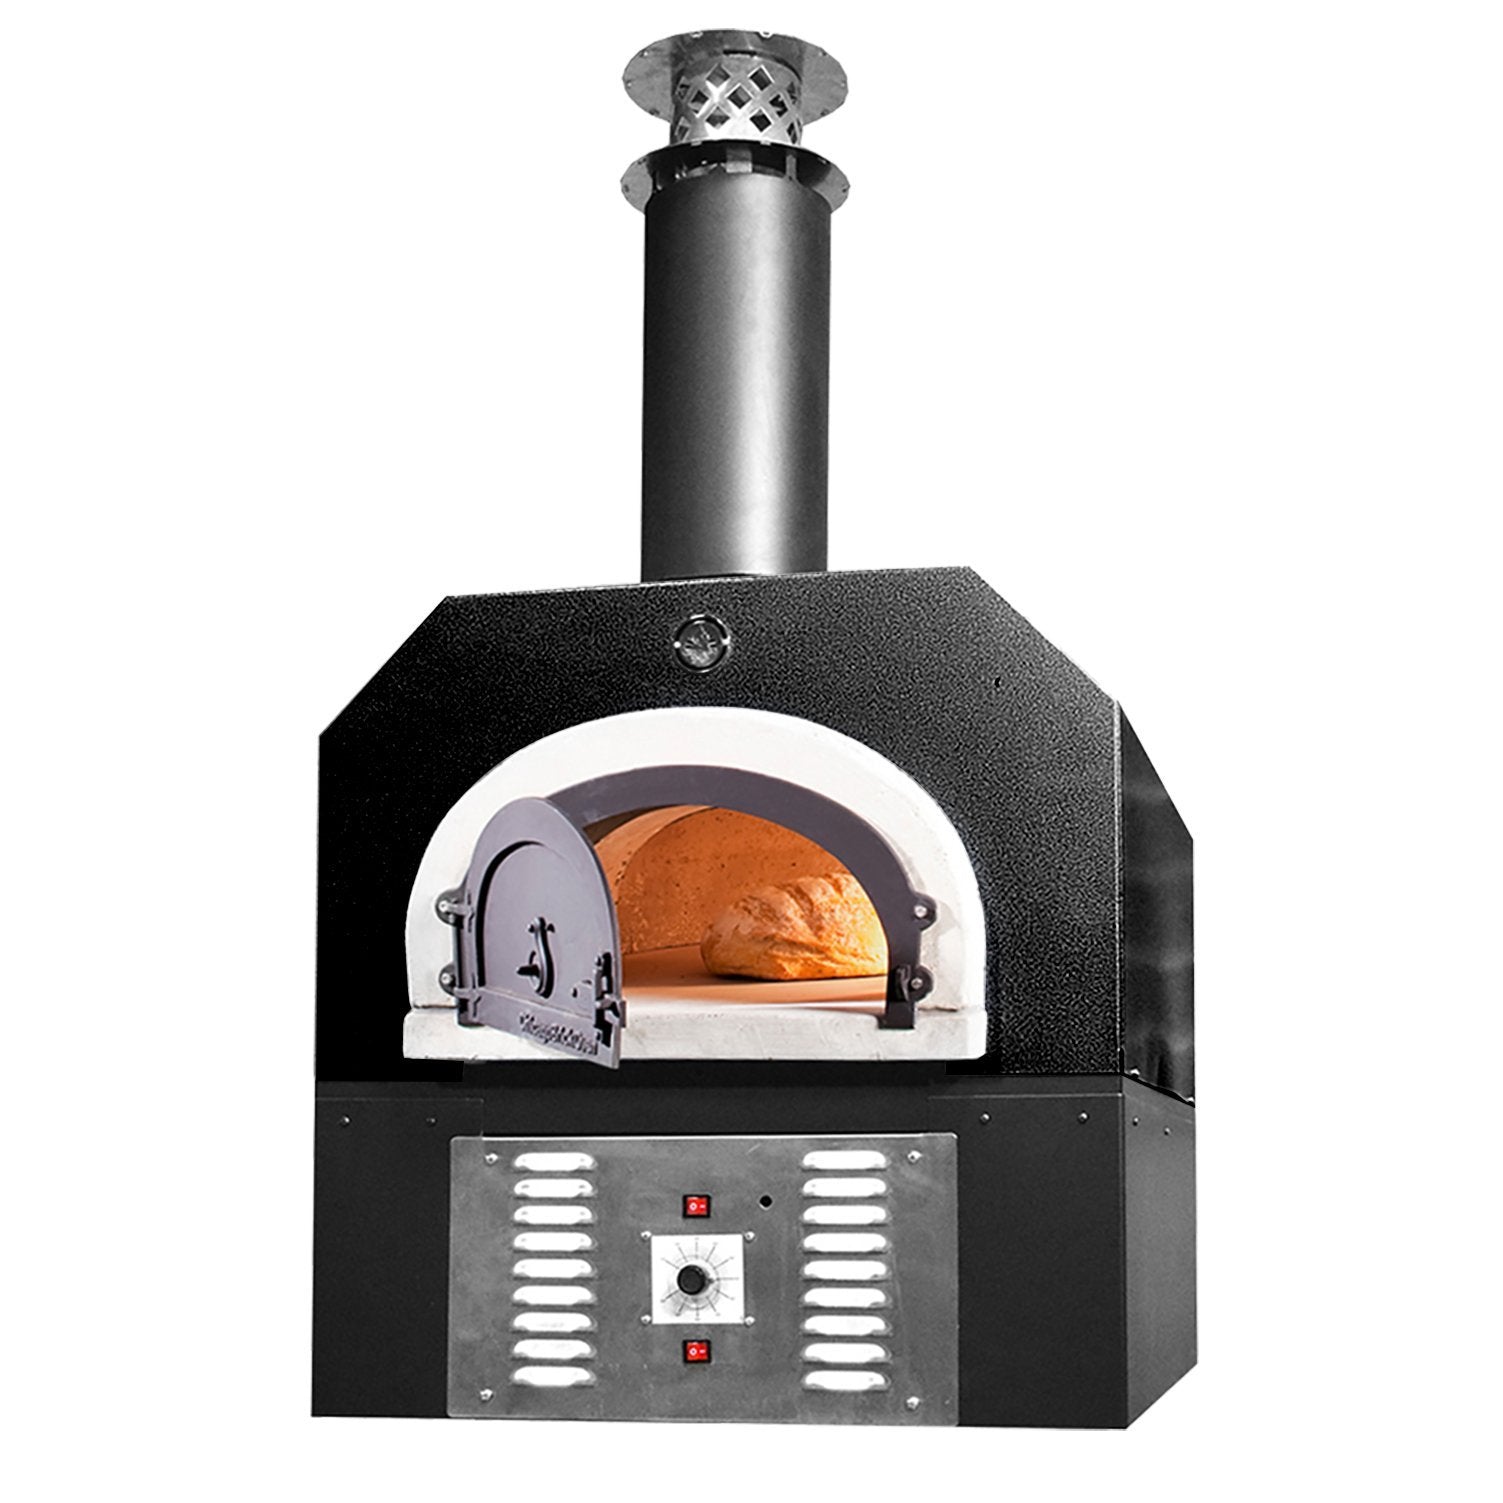 Chicago Brick OvenChicago Brick Oven 750 Hybrid Gas and Wood Commercial Countertop Pizza Oven with Skirt CBO-O-CT-750-HYB-NG-SB-C-3K-SKT- BetterPatio.com